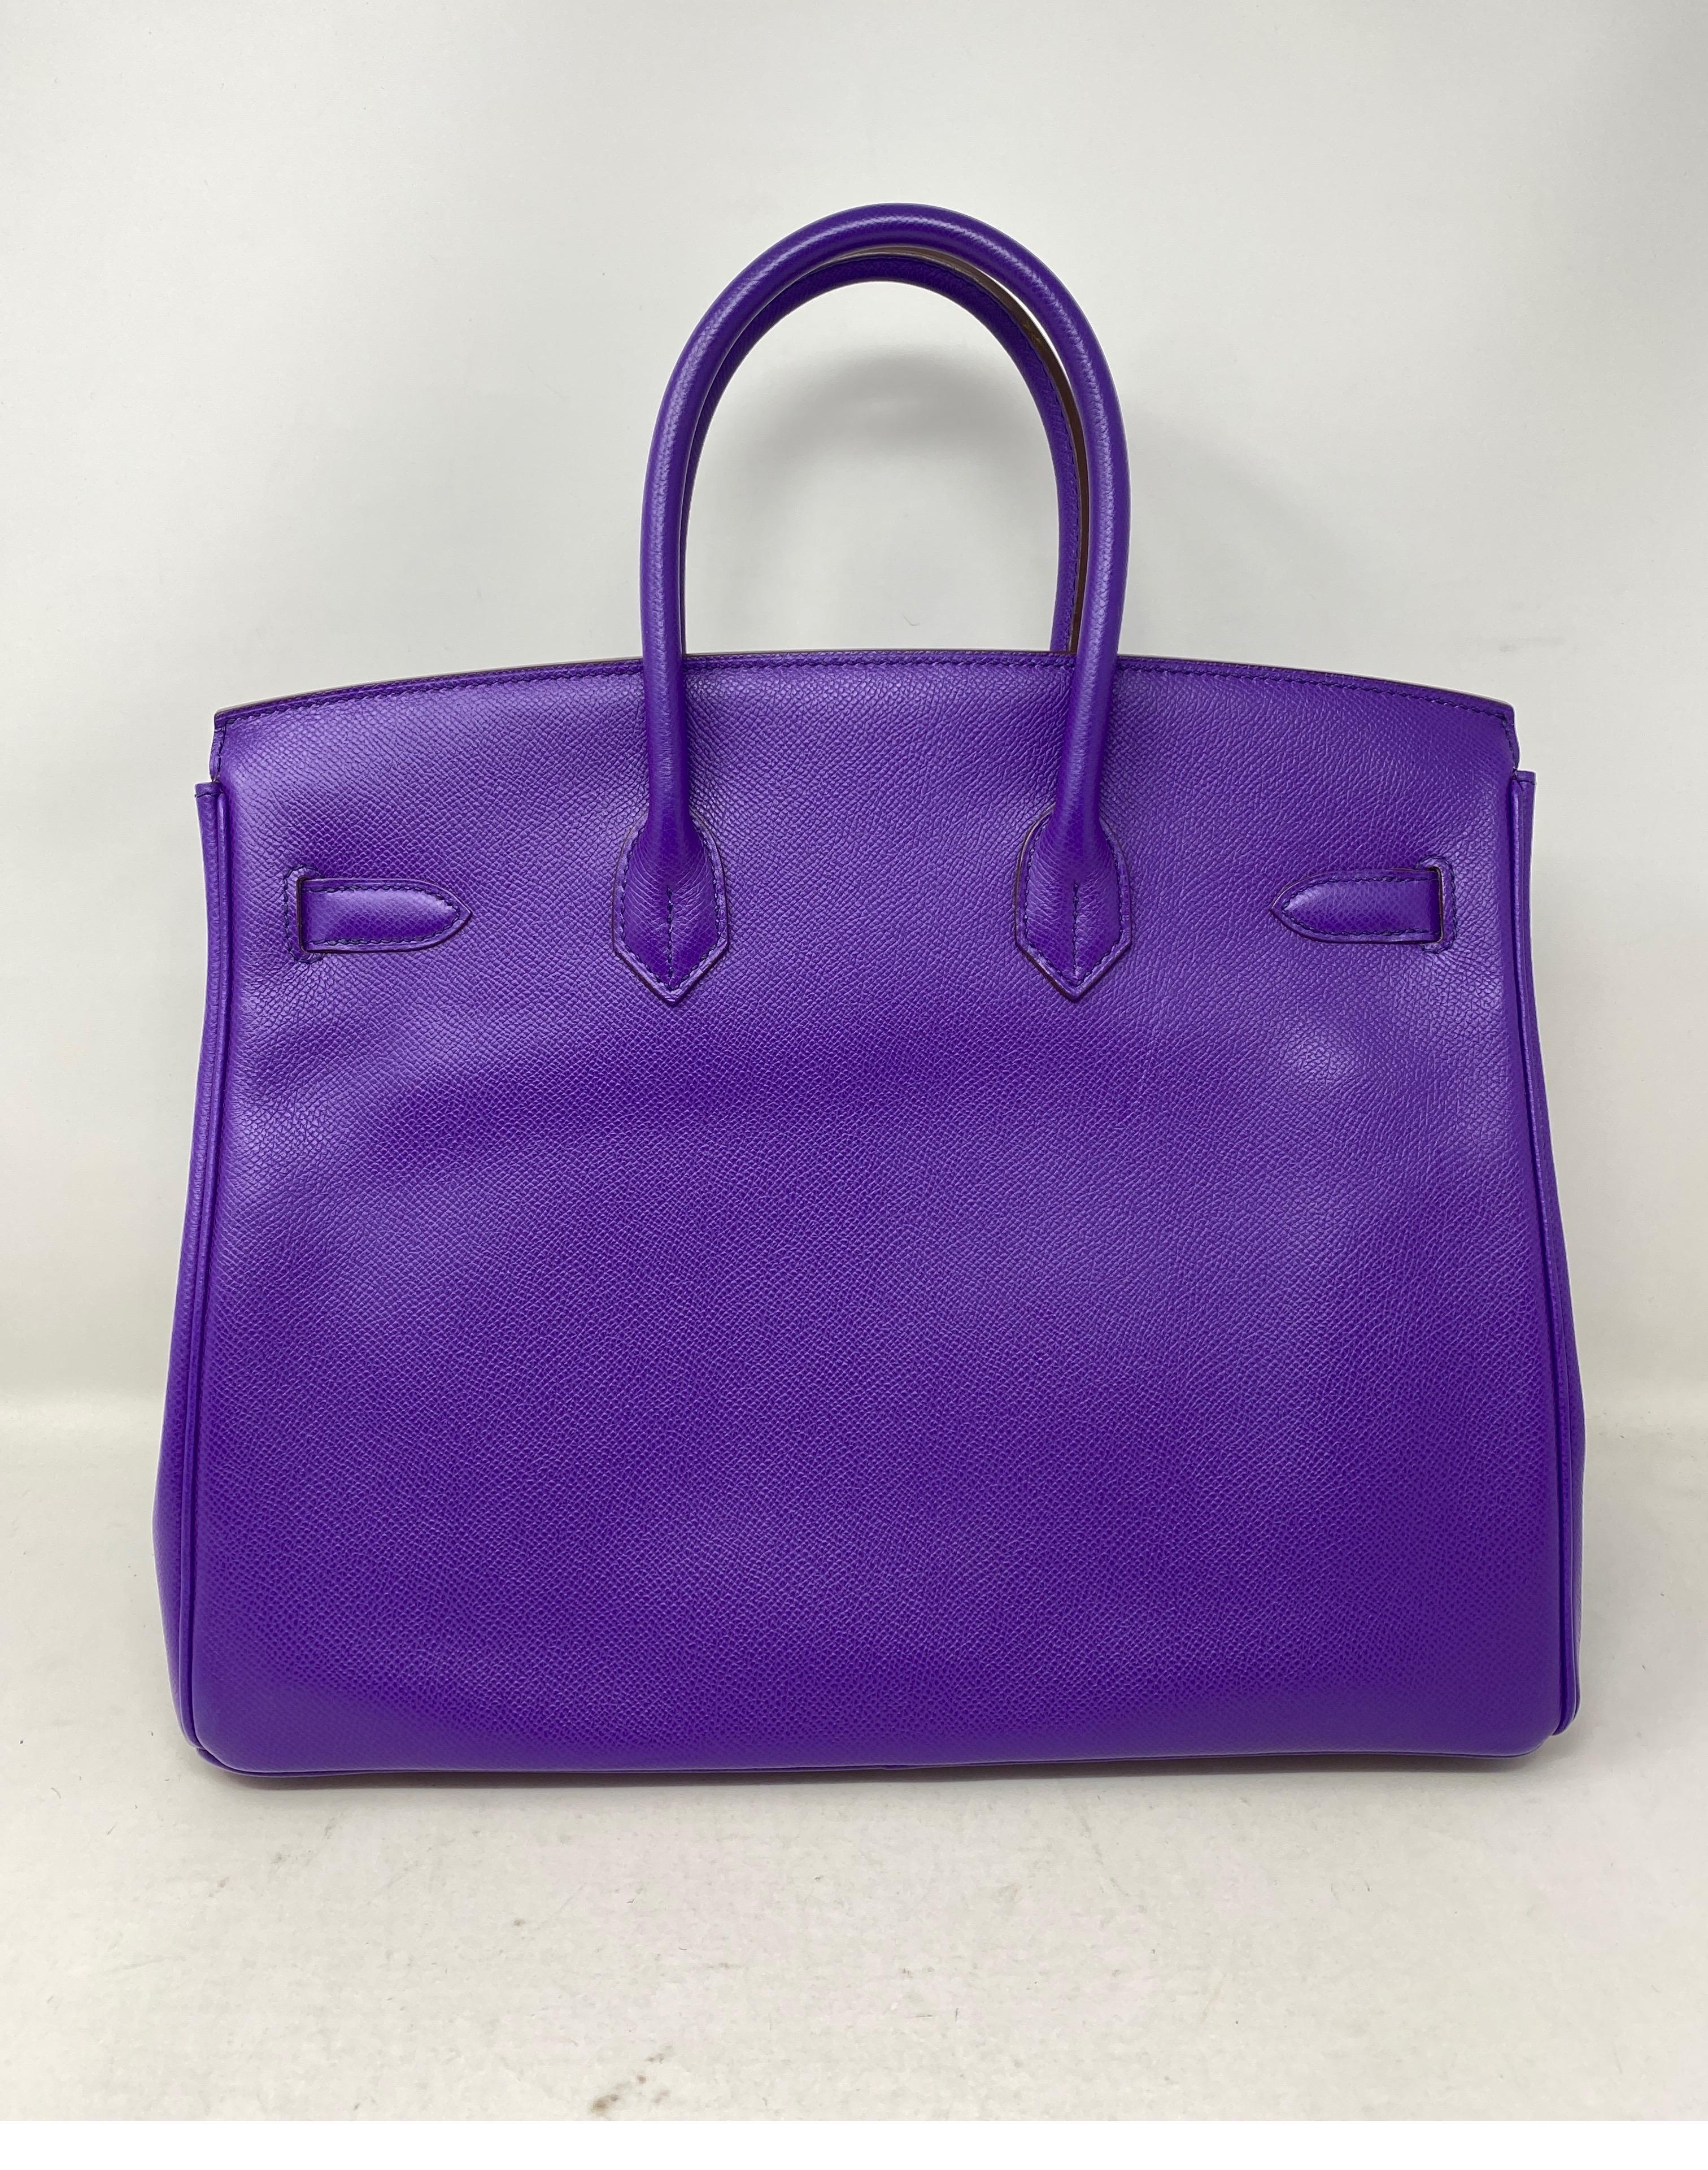 Hermes Birkin Crocus 35 Bag. Vibrant purple epsom leather. Palladium hardware. Excellent condition. Gold hardware. Rare combination. Includes clochette, lock, keys, and dust cover. Guaranteed authentic. Don't miss out on this one. 